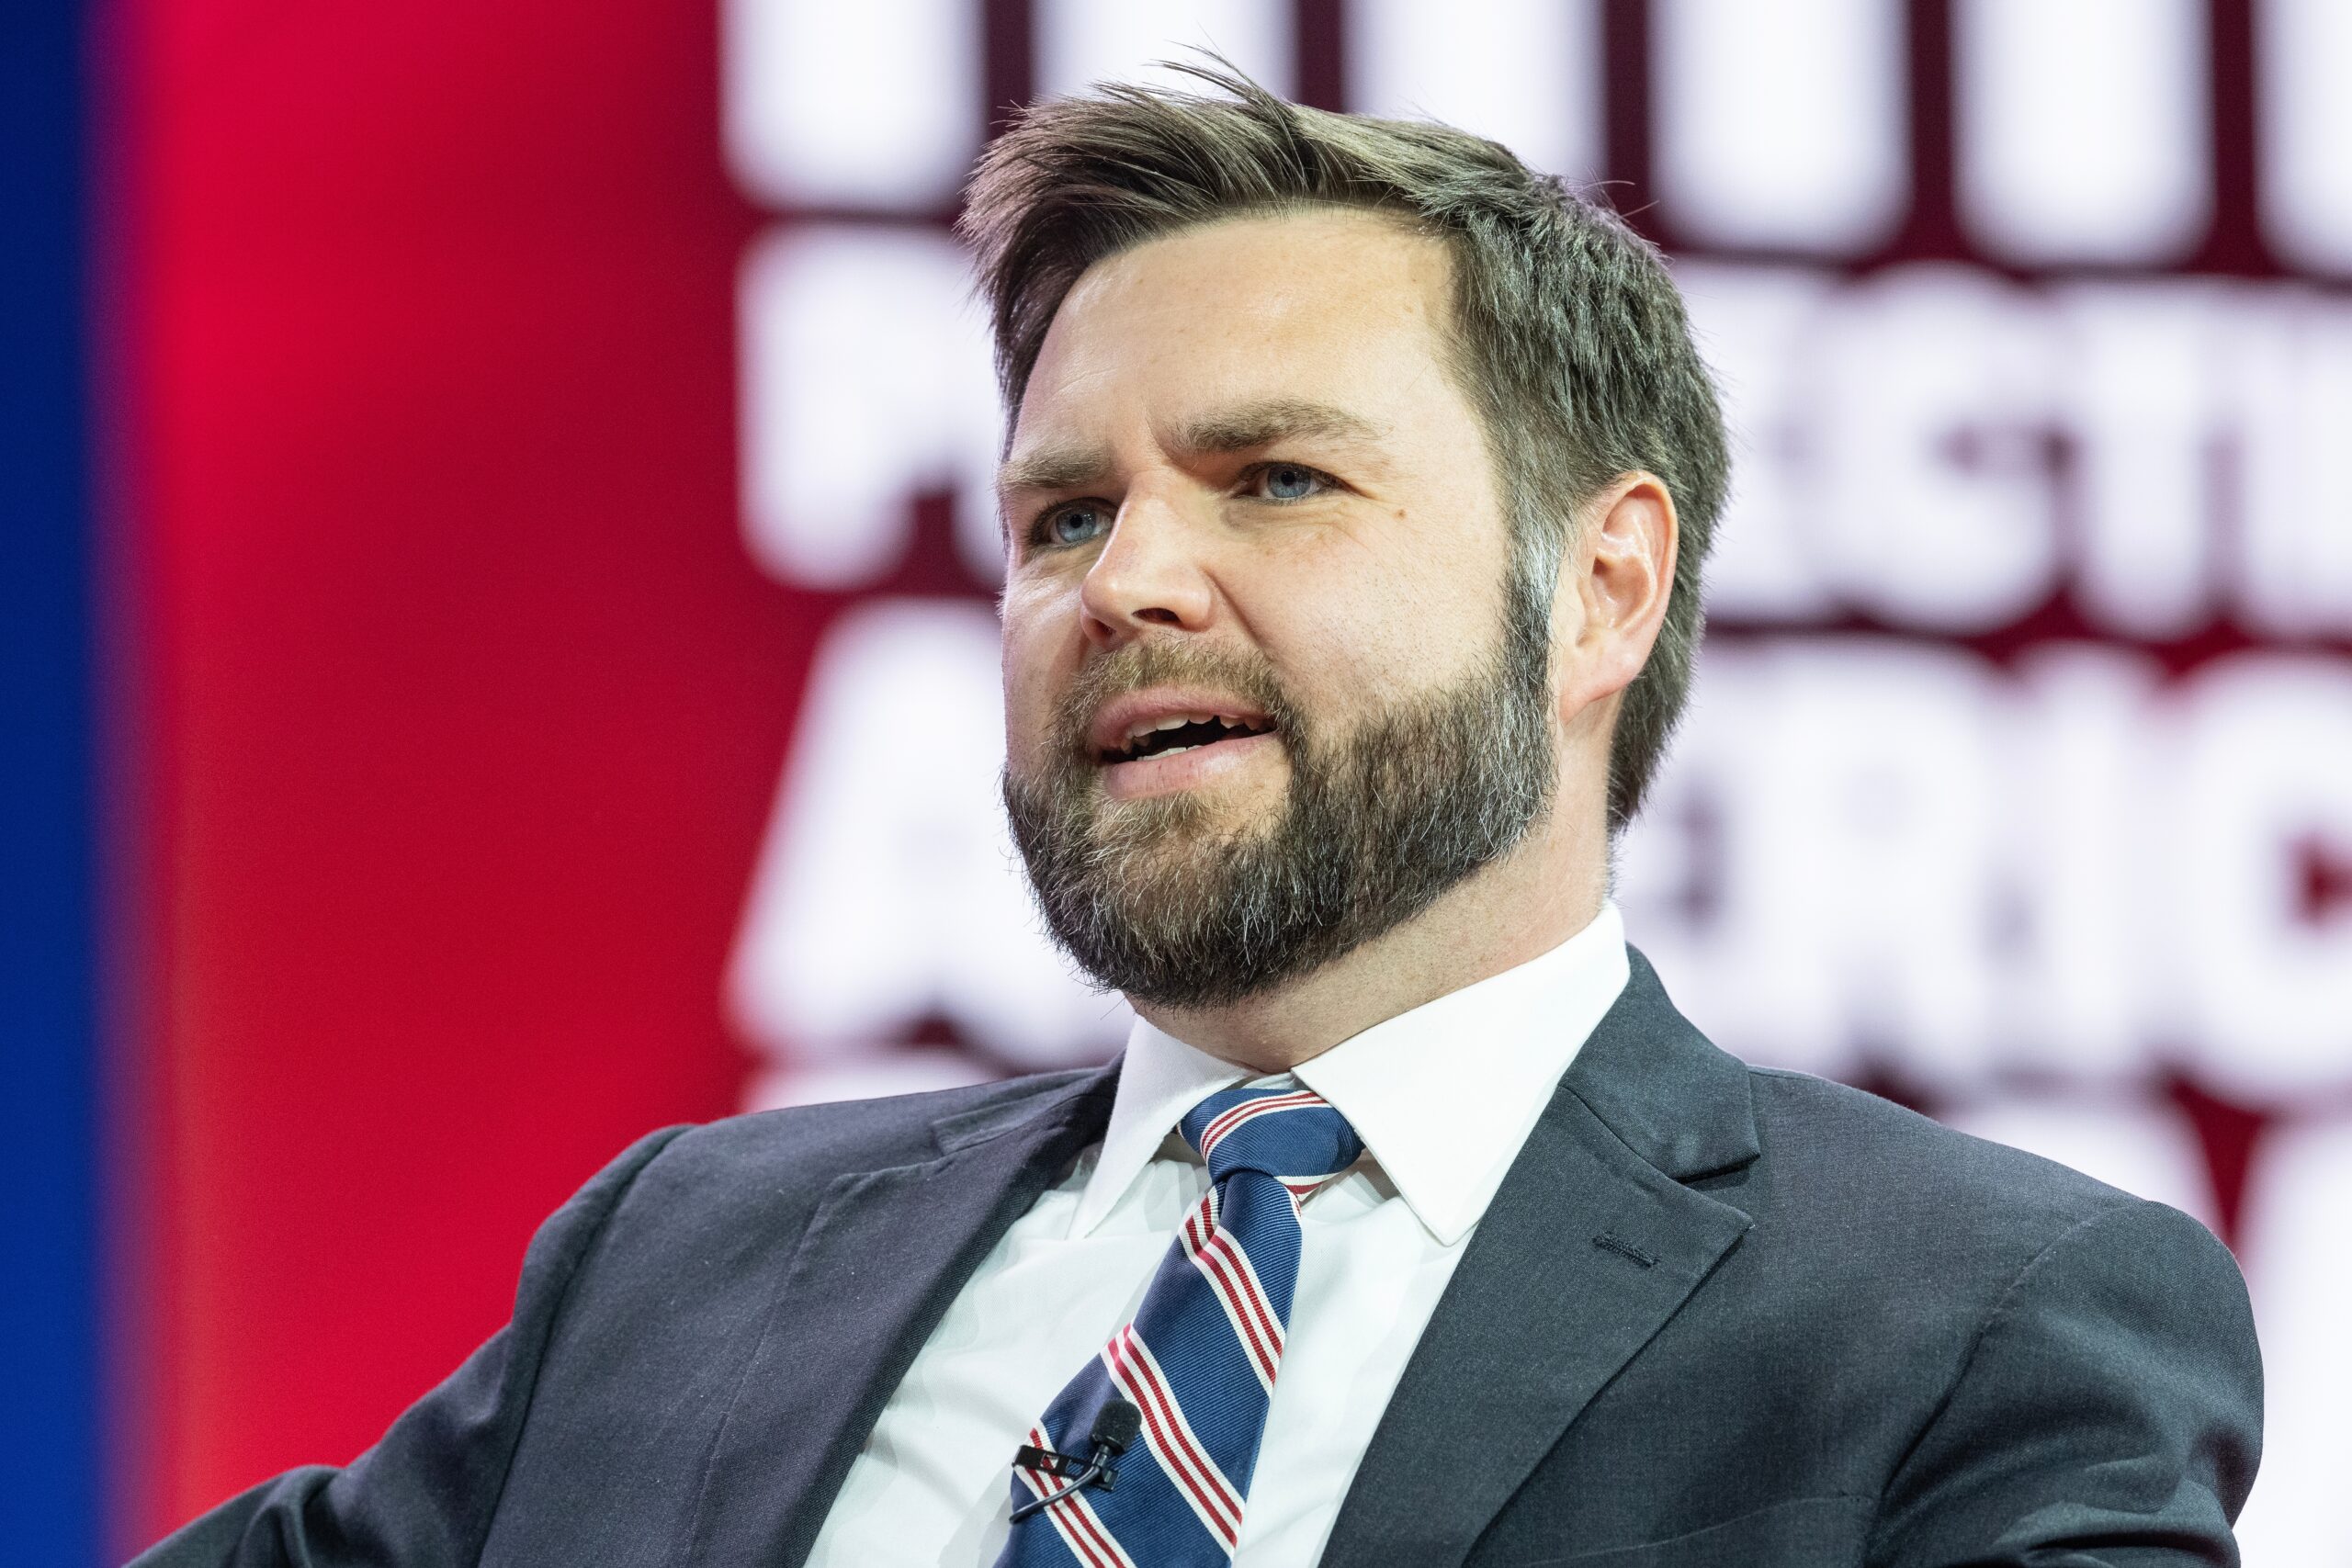 US Senator J. D. Vance speaks on the 1st day of CPAC Washington, DC conference at Gaylord National Harbor Resort Convention on March 2, 2023